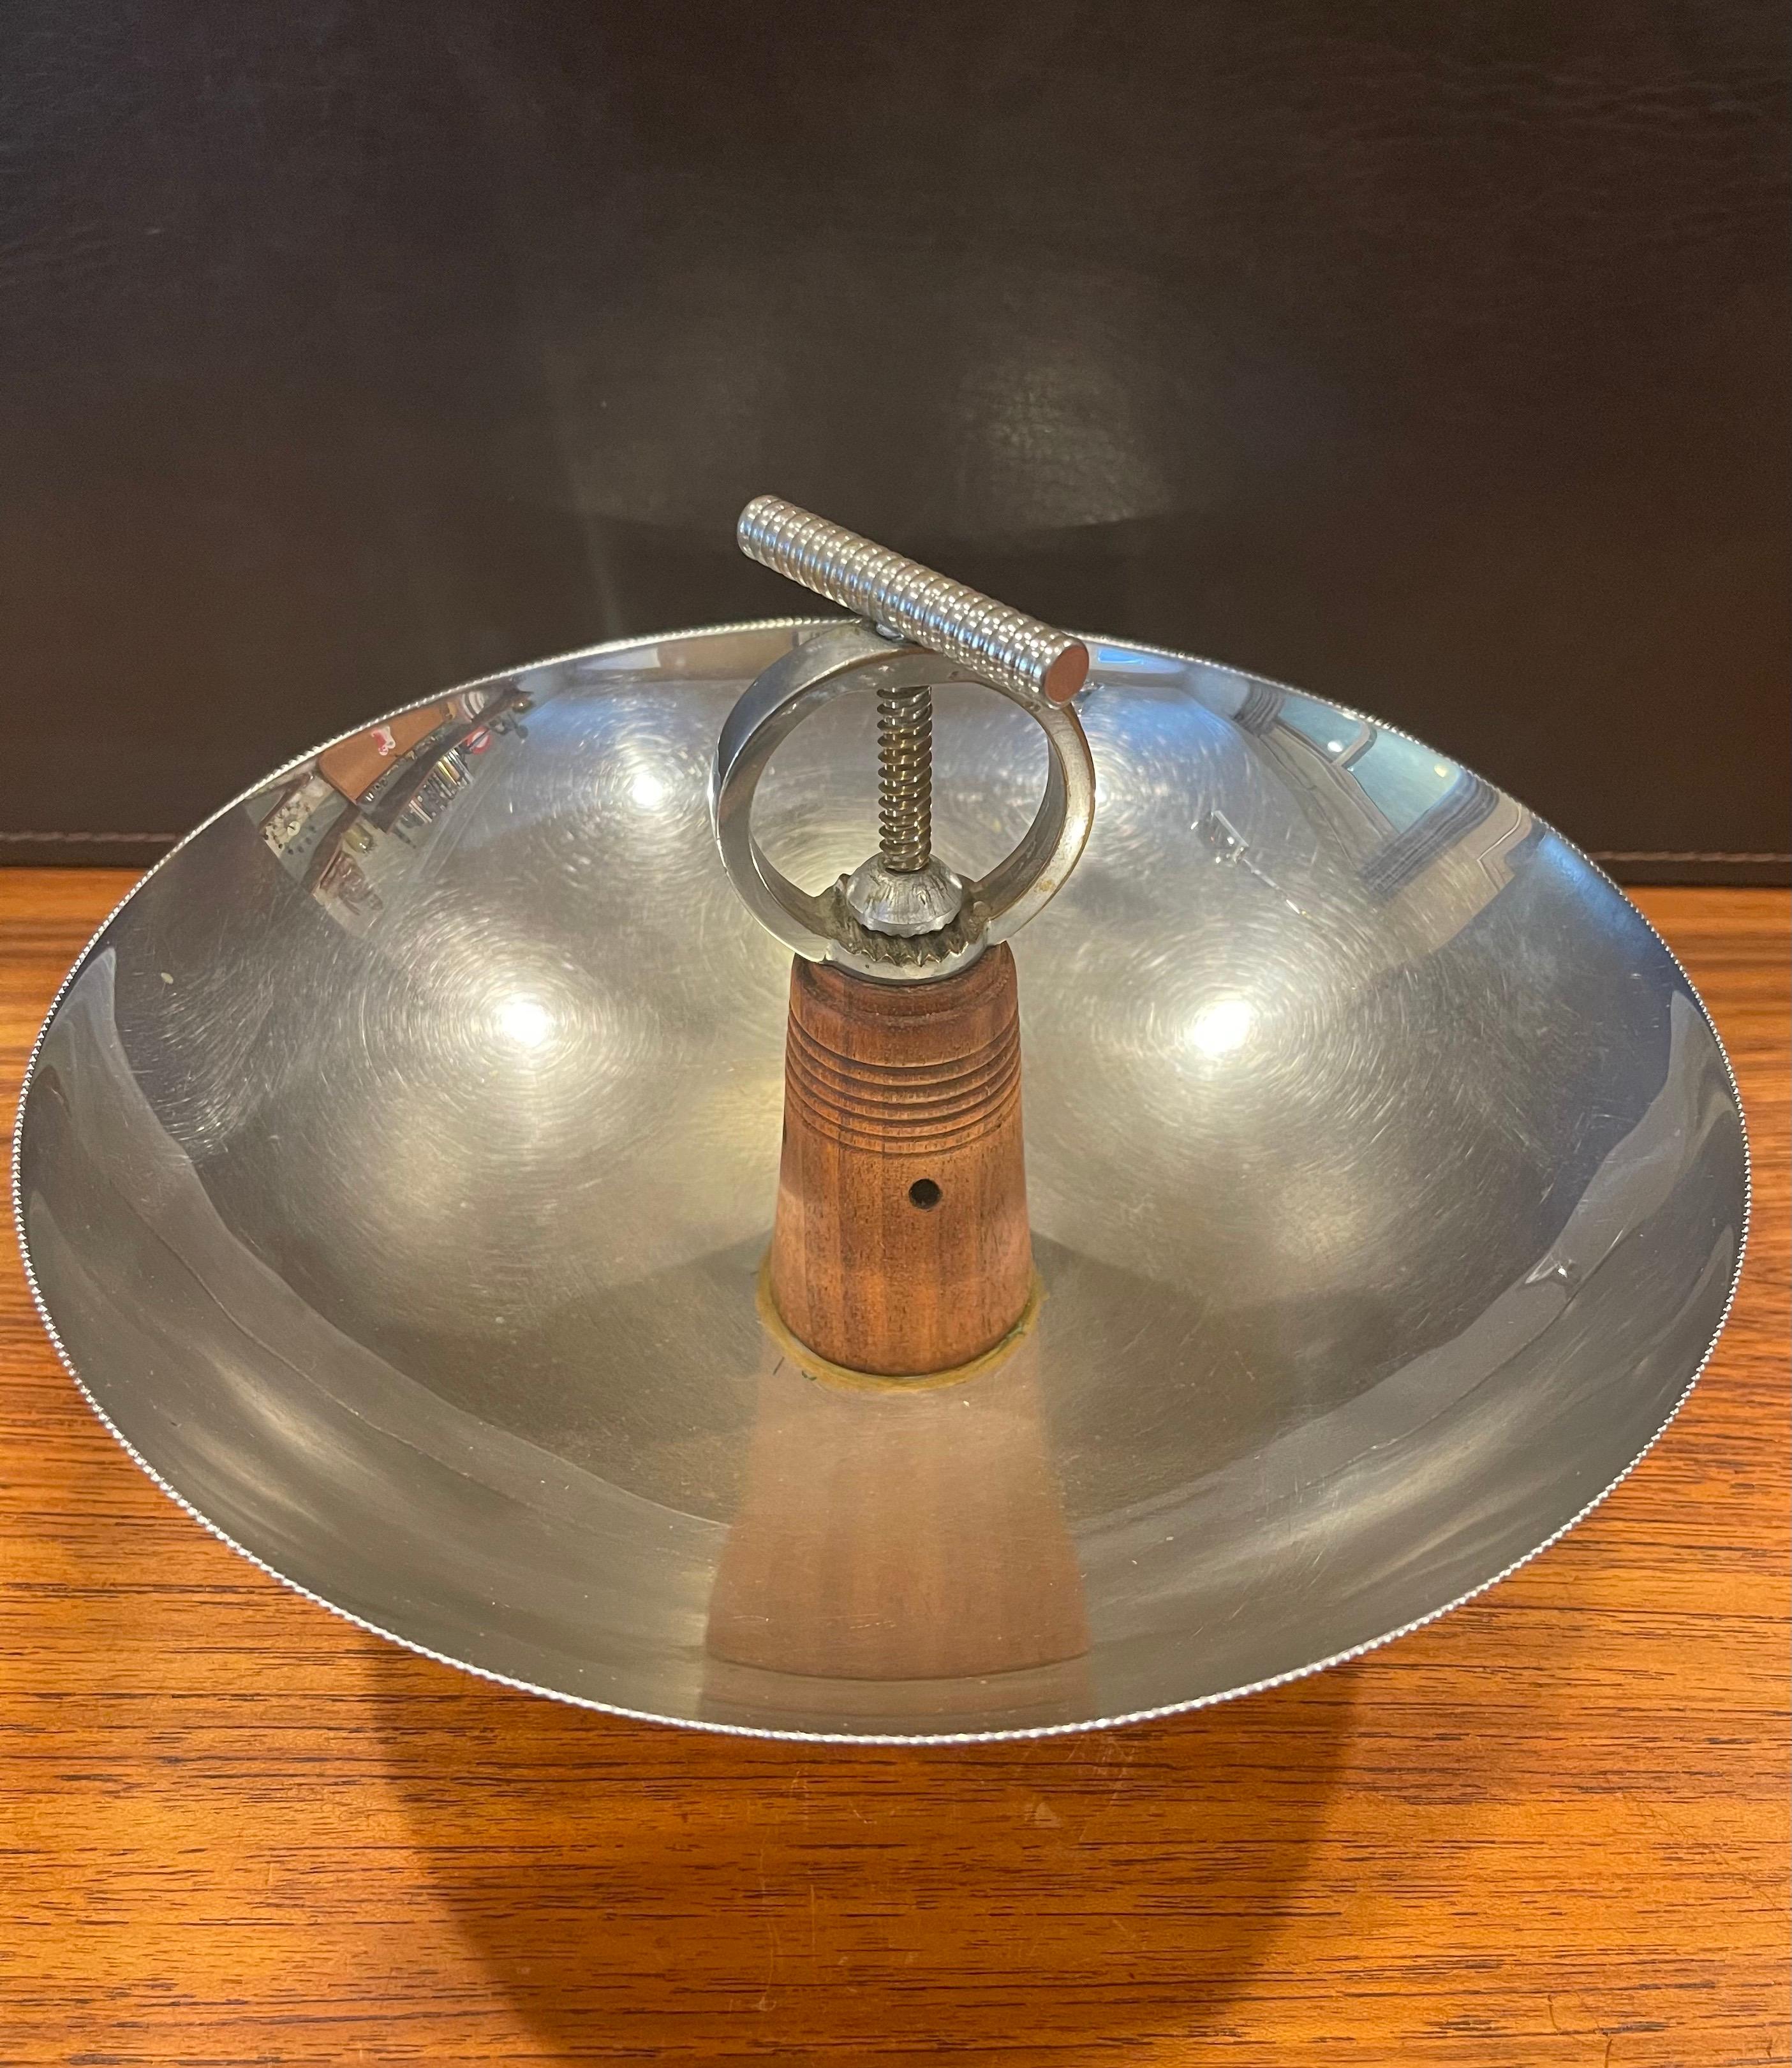 Art Deco Chrome Nut Bowl with Built-in Cracker by Chase Co. For Sale 2